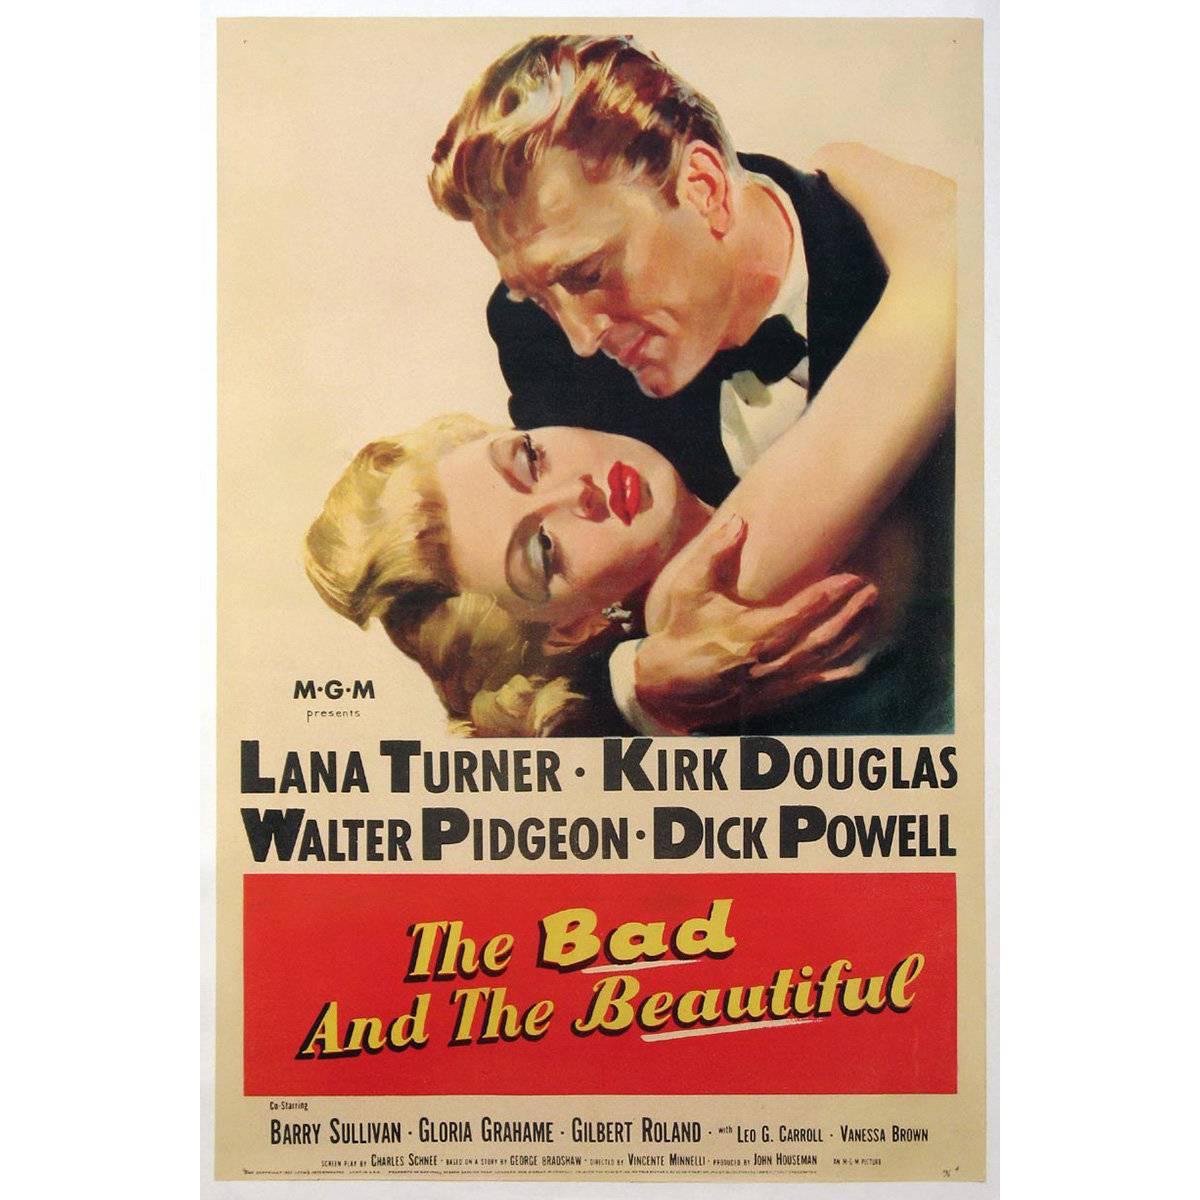 "The Bad And The Beautiful" Film Poster, 1952